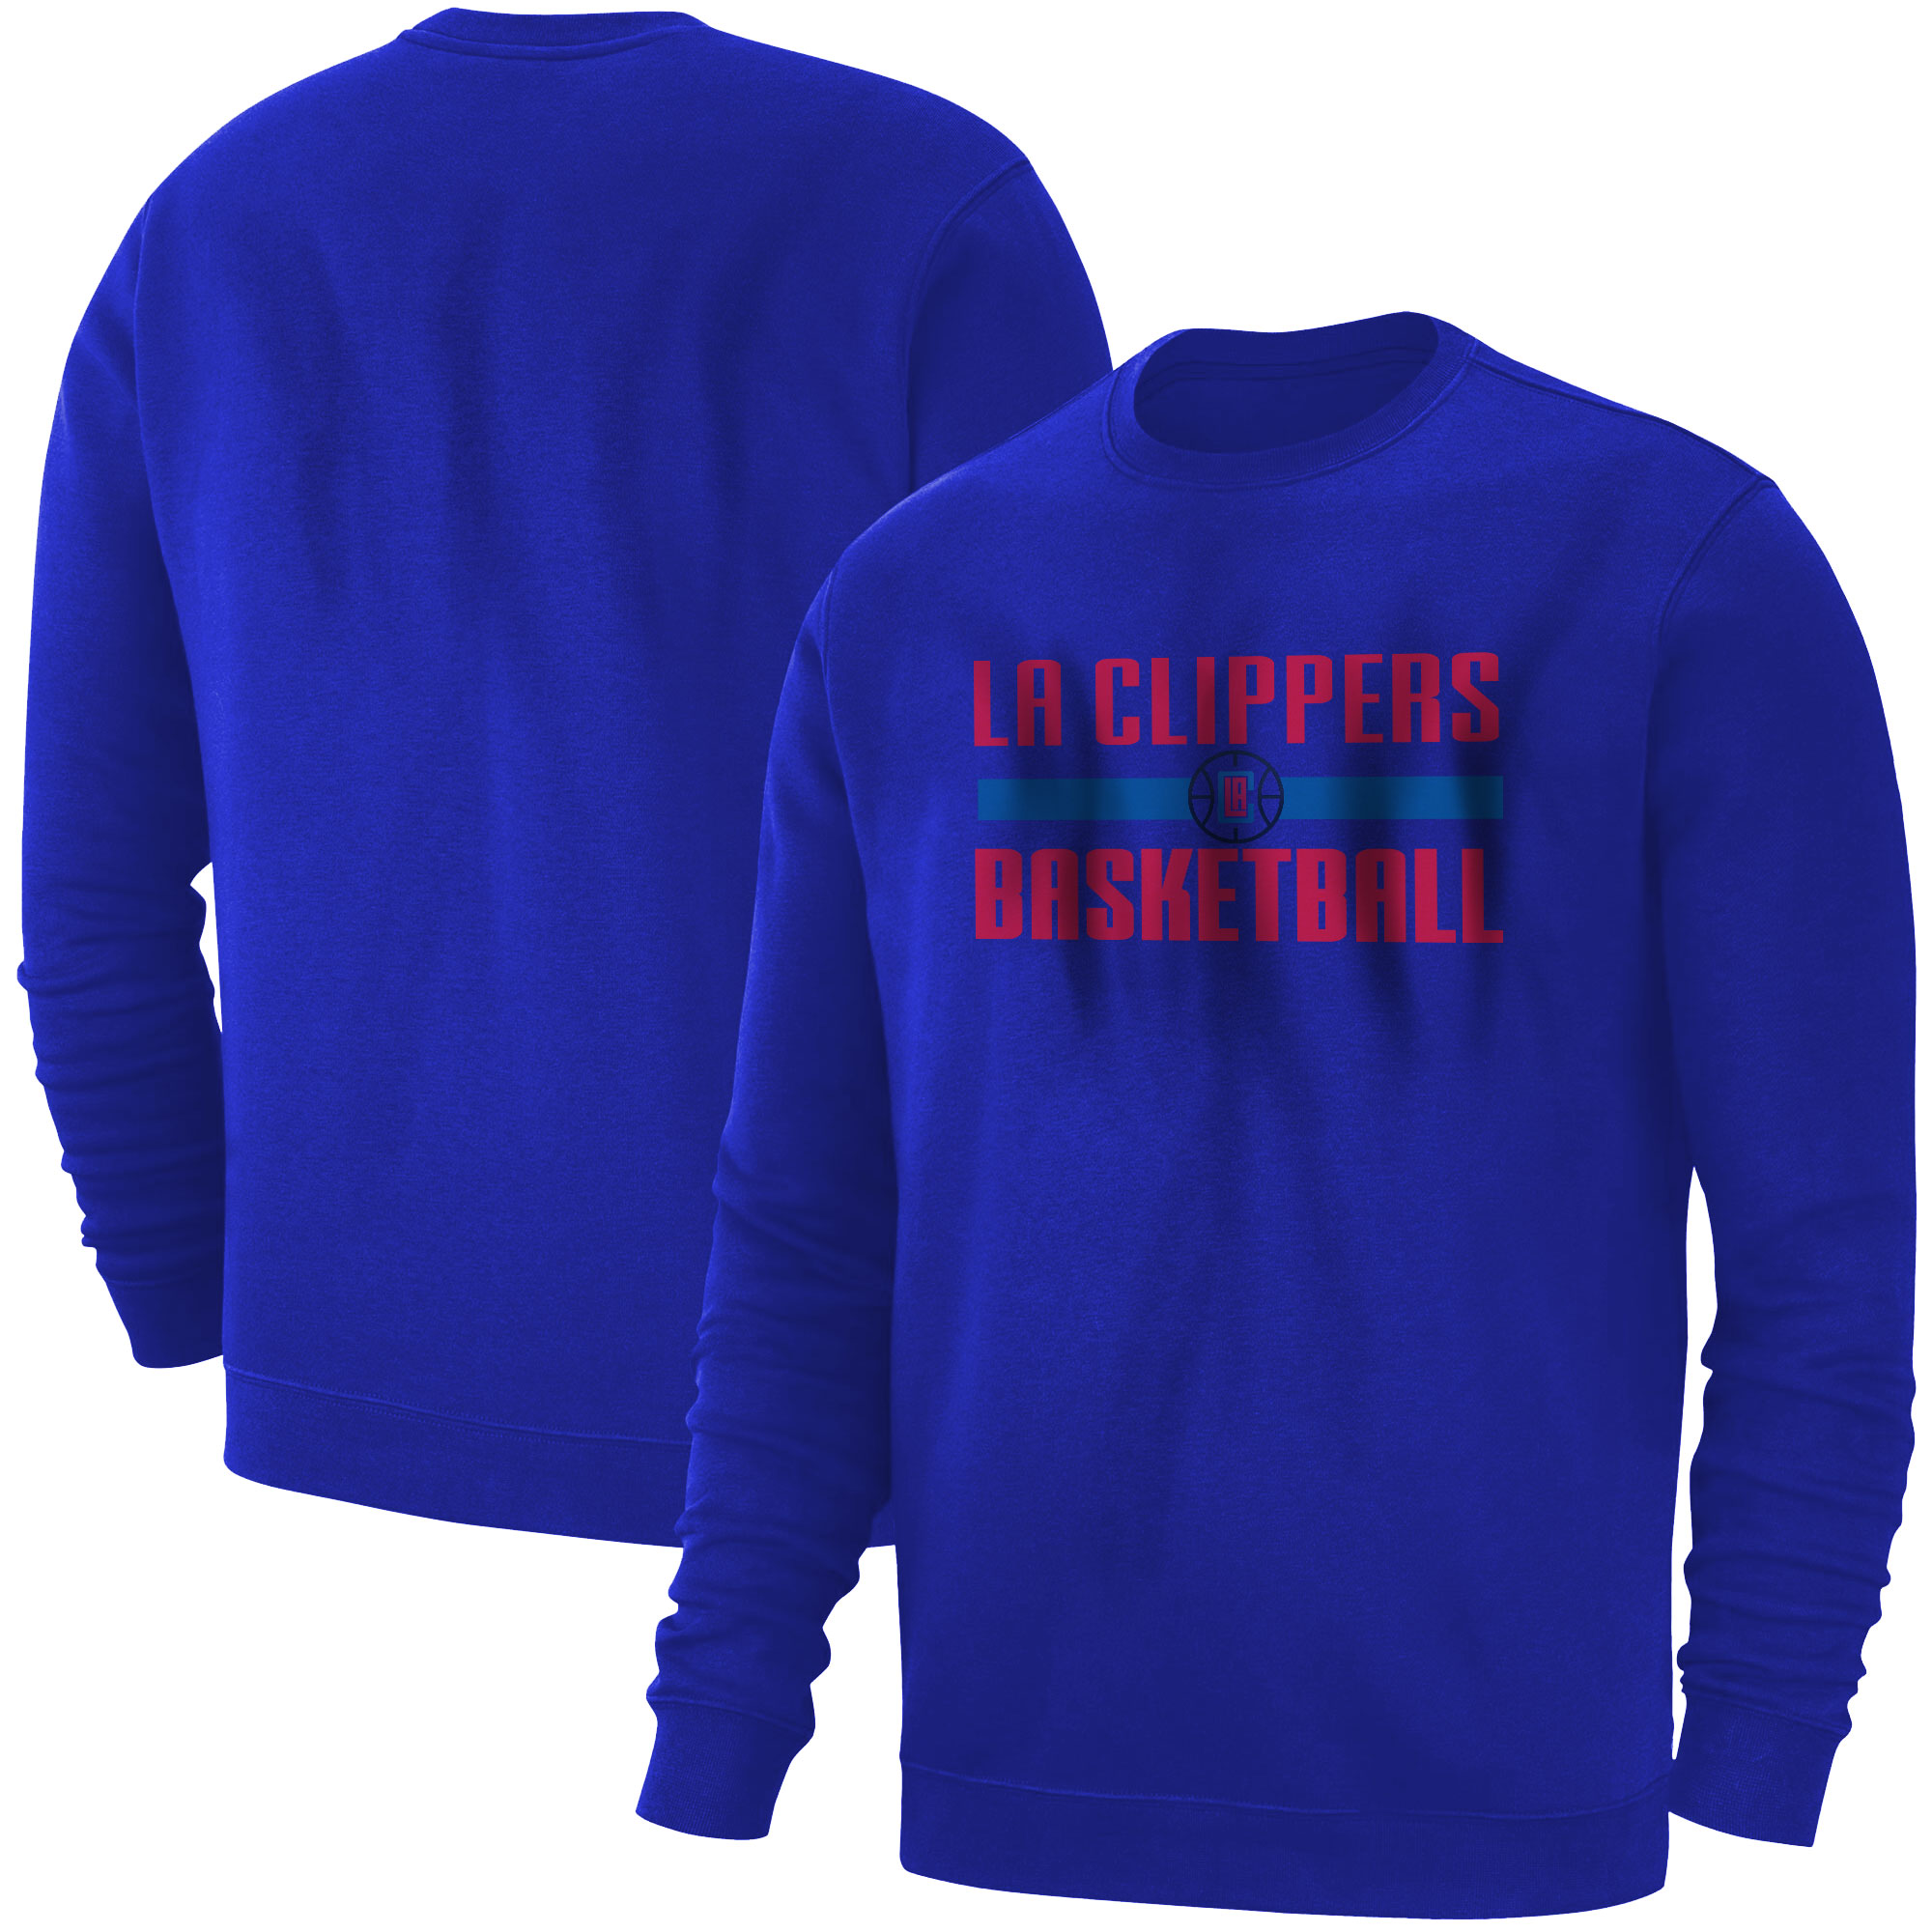 L.A. Clippers Basketball Basic (BSC-BLU-708)